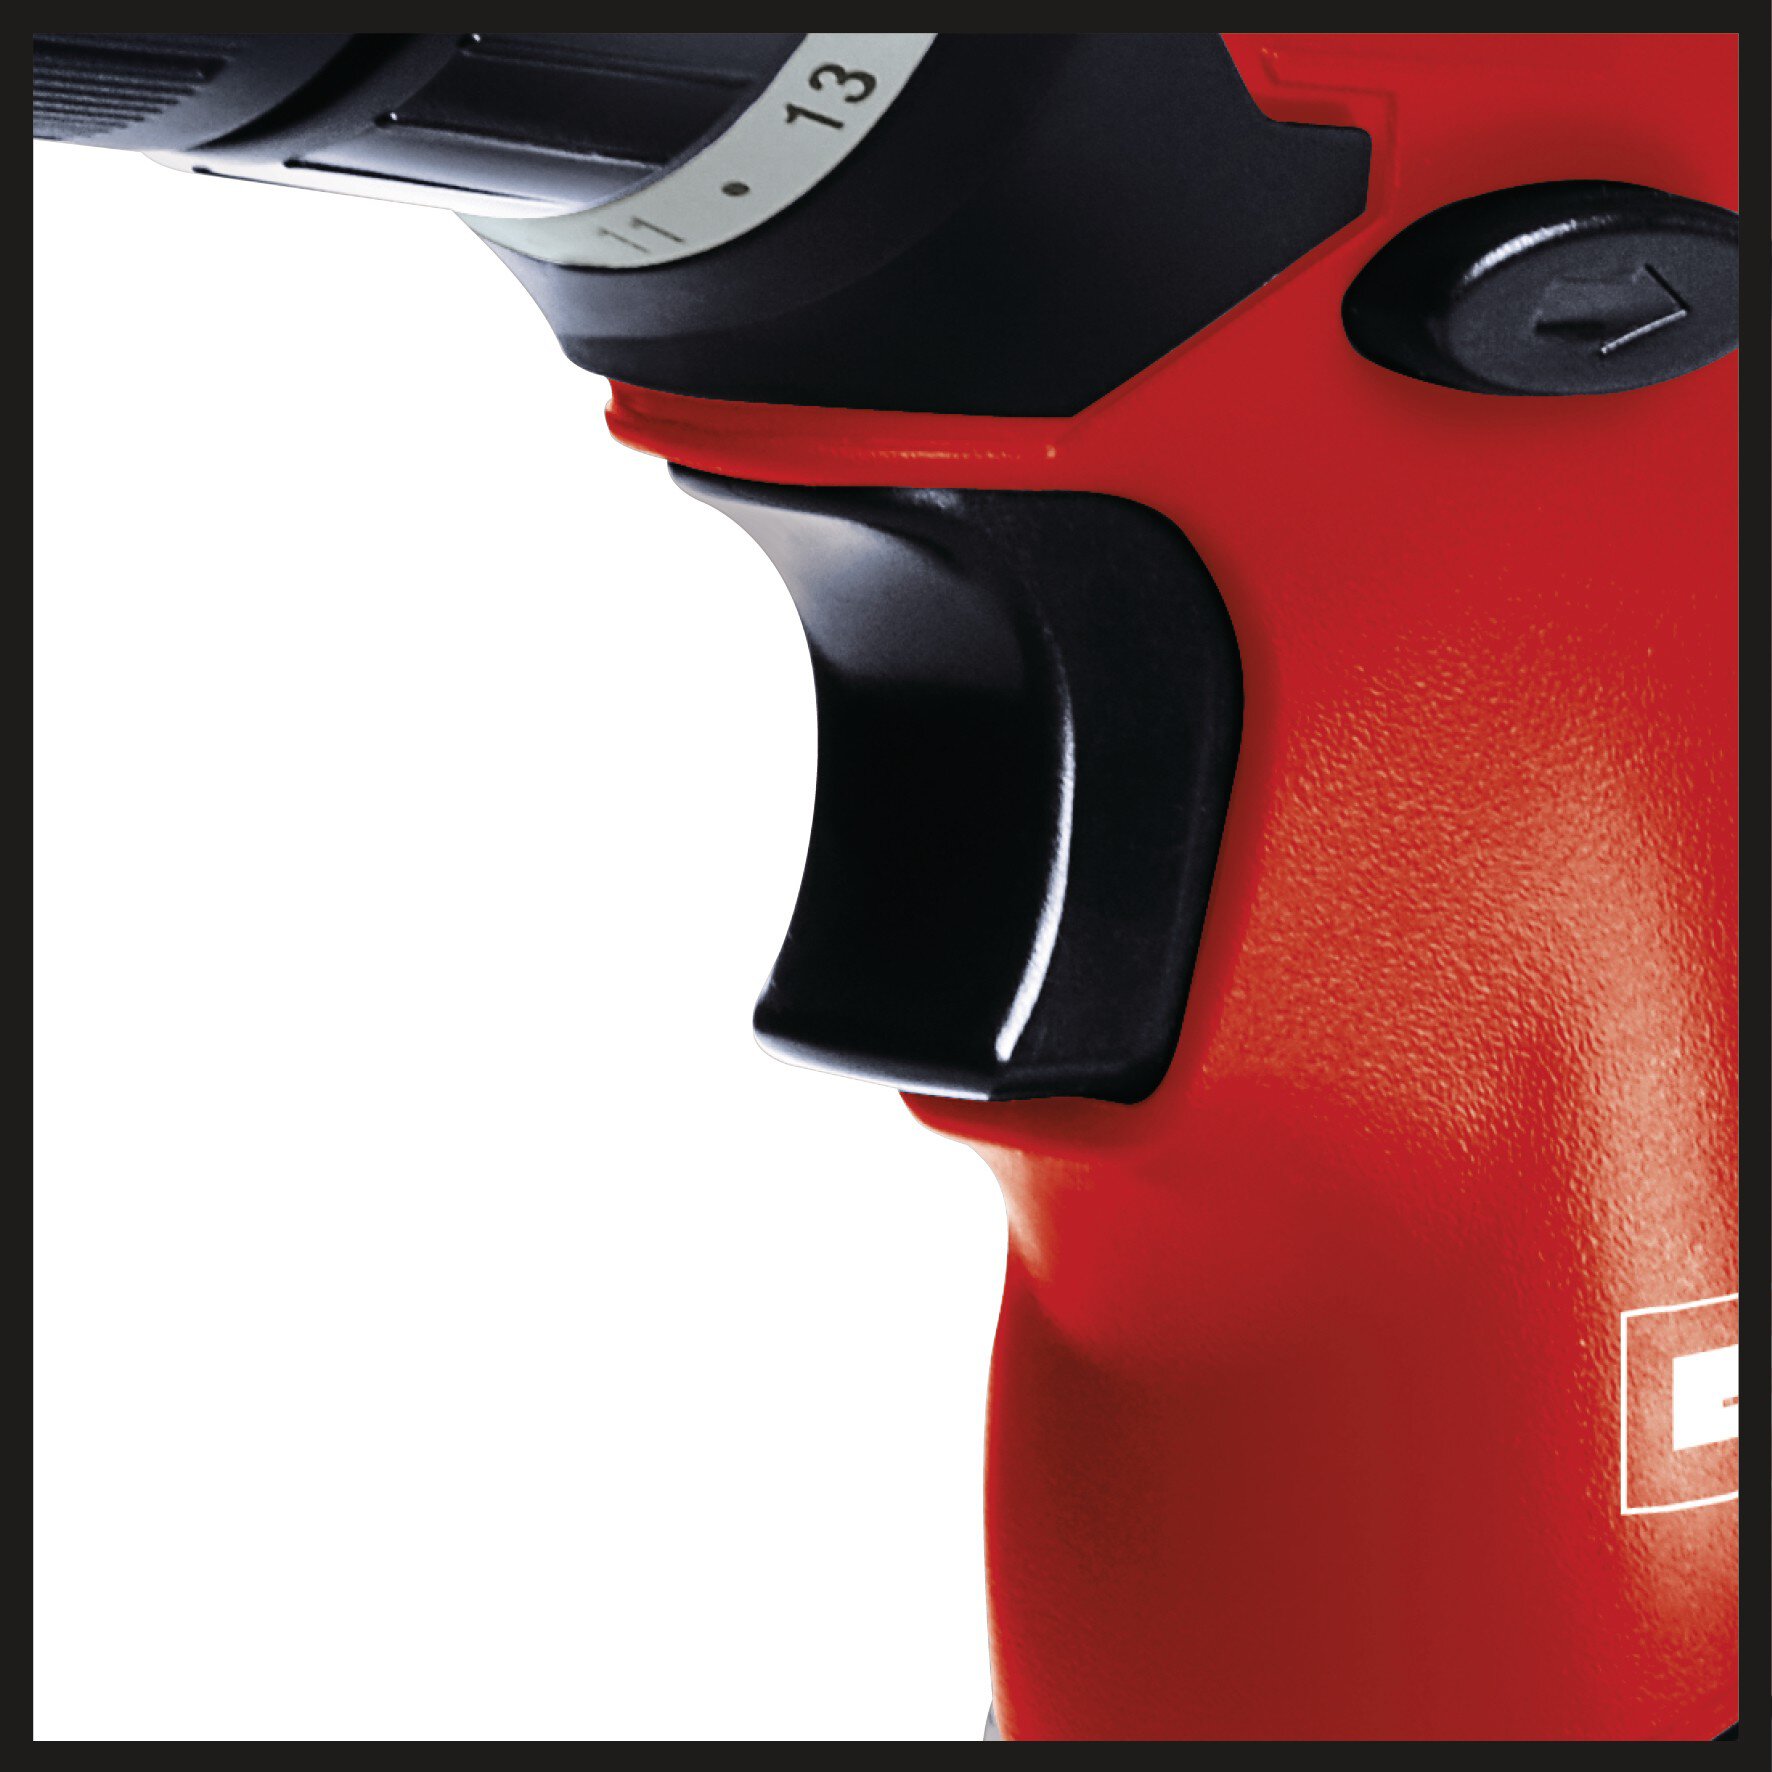 einhell-classic-cordless-drill-4513660-detail_image-003